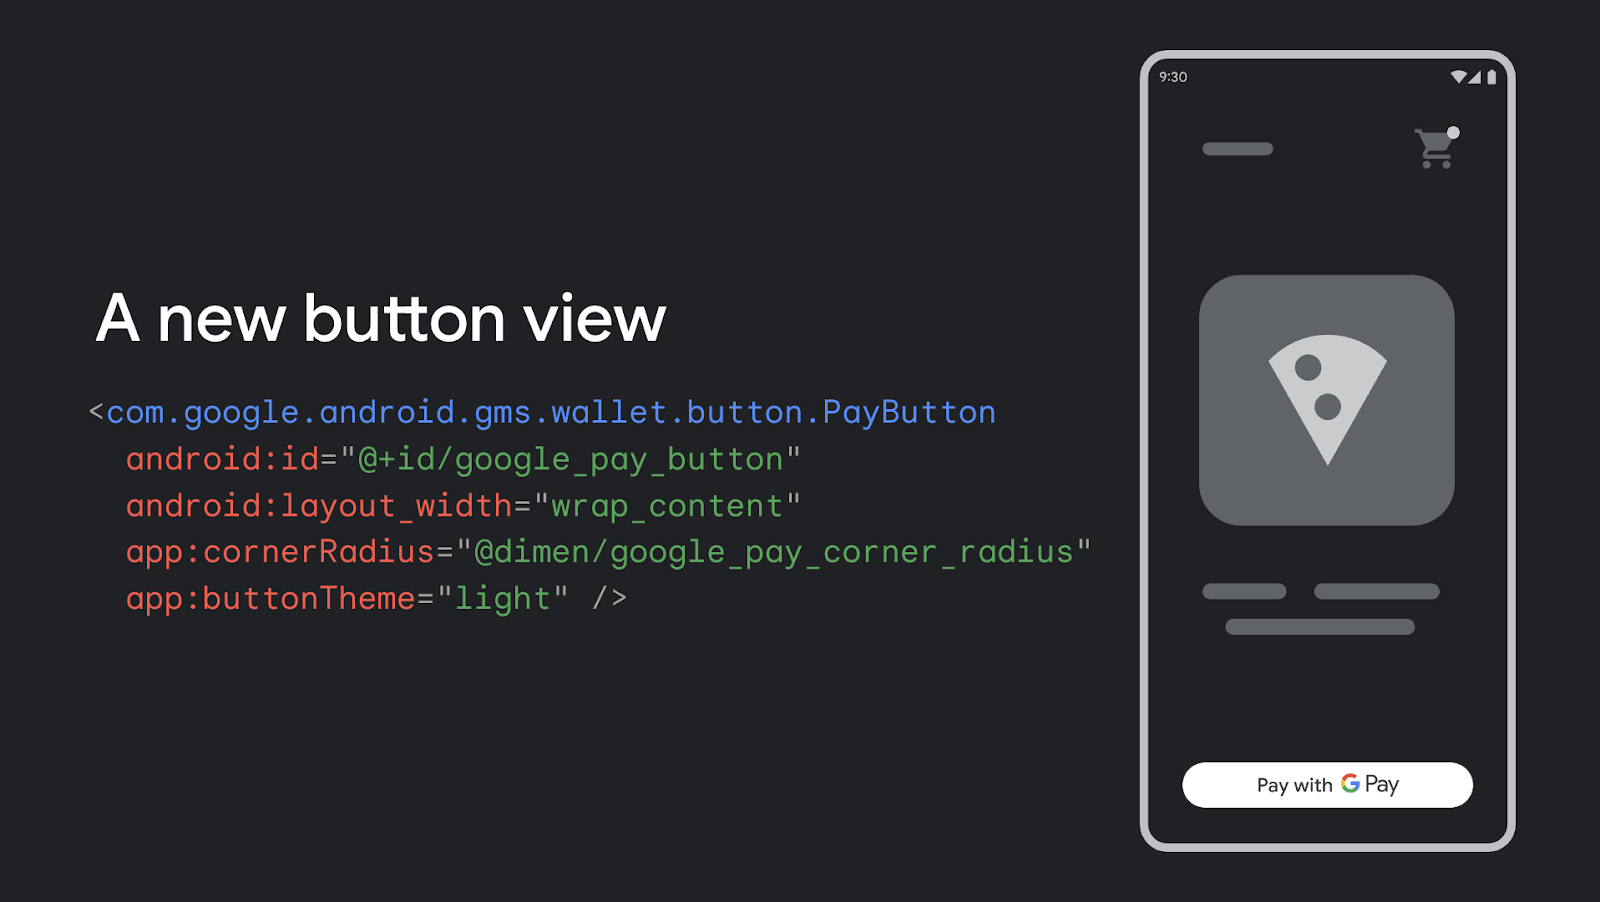 image of an example implementation showing how you can add and configure the new button view directly to your XML layout on Android